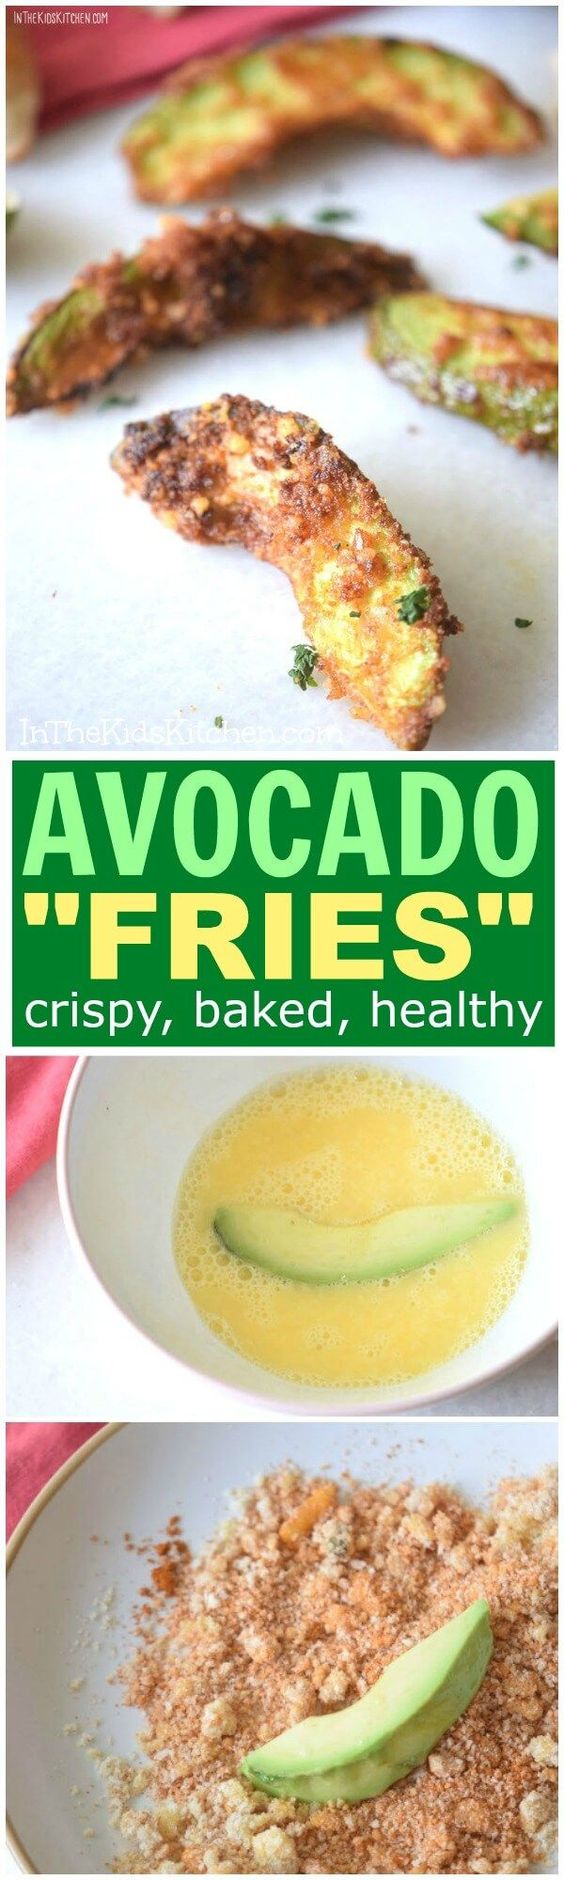 Discover how you can incorporate these healthy snack ideas and recipes in your diet with help from this health post. | healthy snack recipes | snacks that burn fat | healthy evening snacks for weight loss | clean snacks for weight loss #healthyrecipes #healthyeating #healthymeals #mealprep #nutrition #keepingfit #weightloss #diets